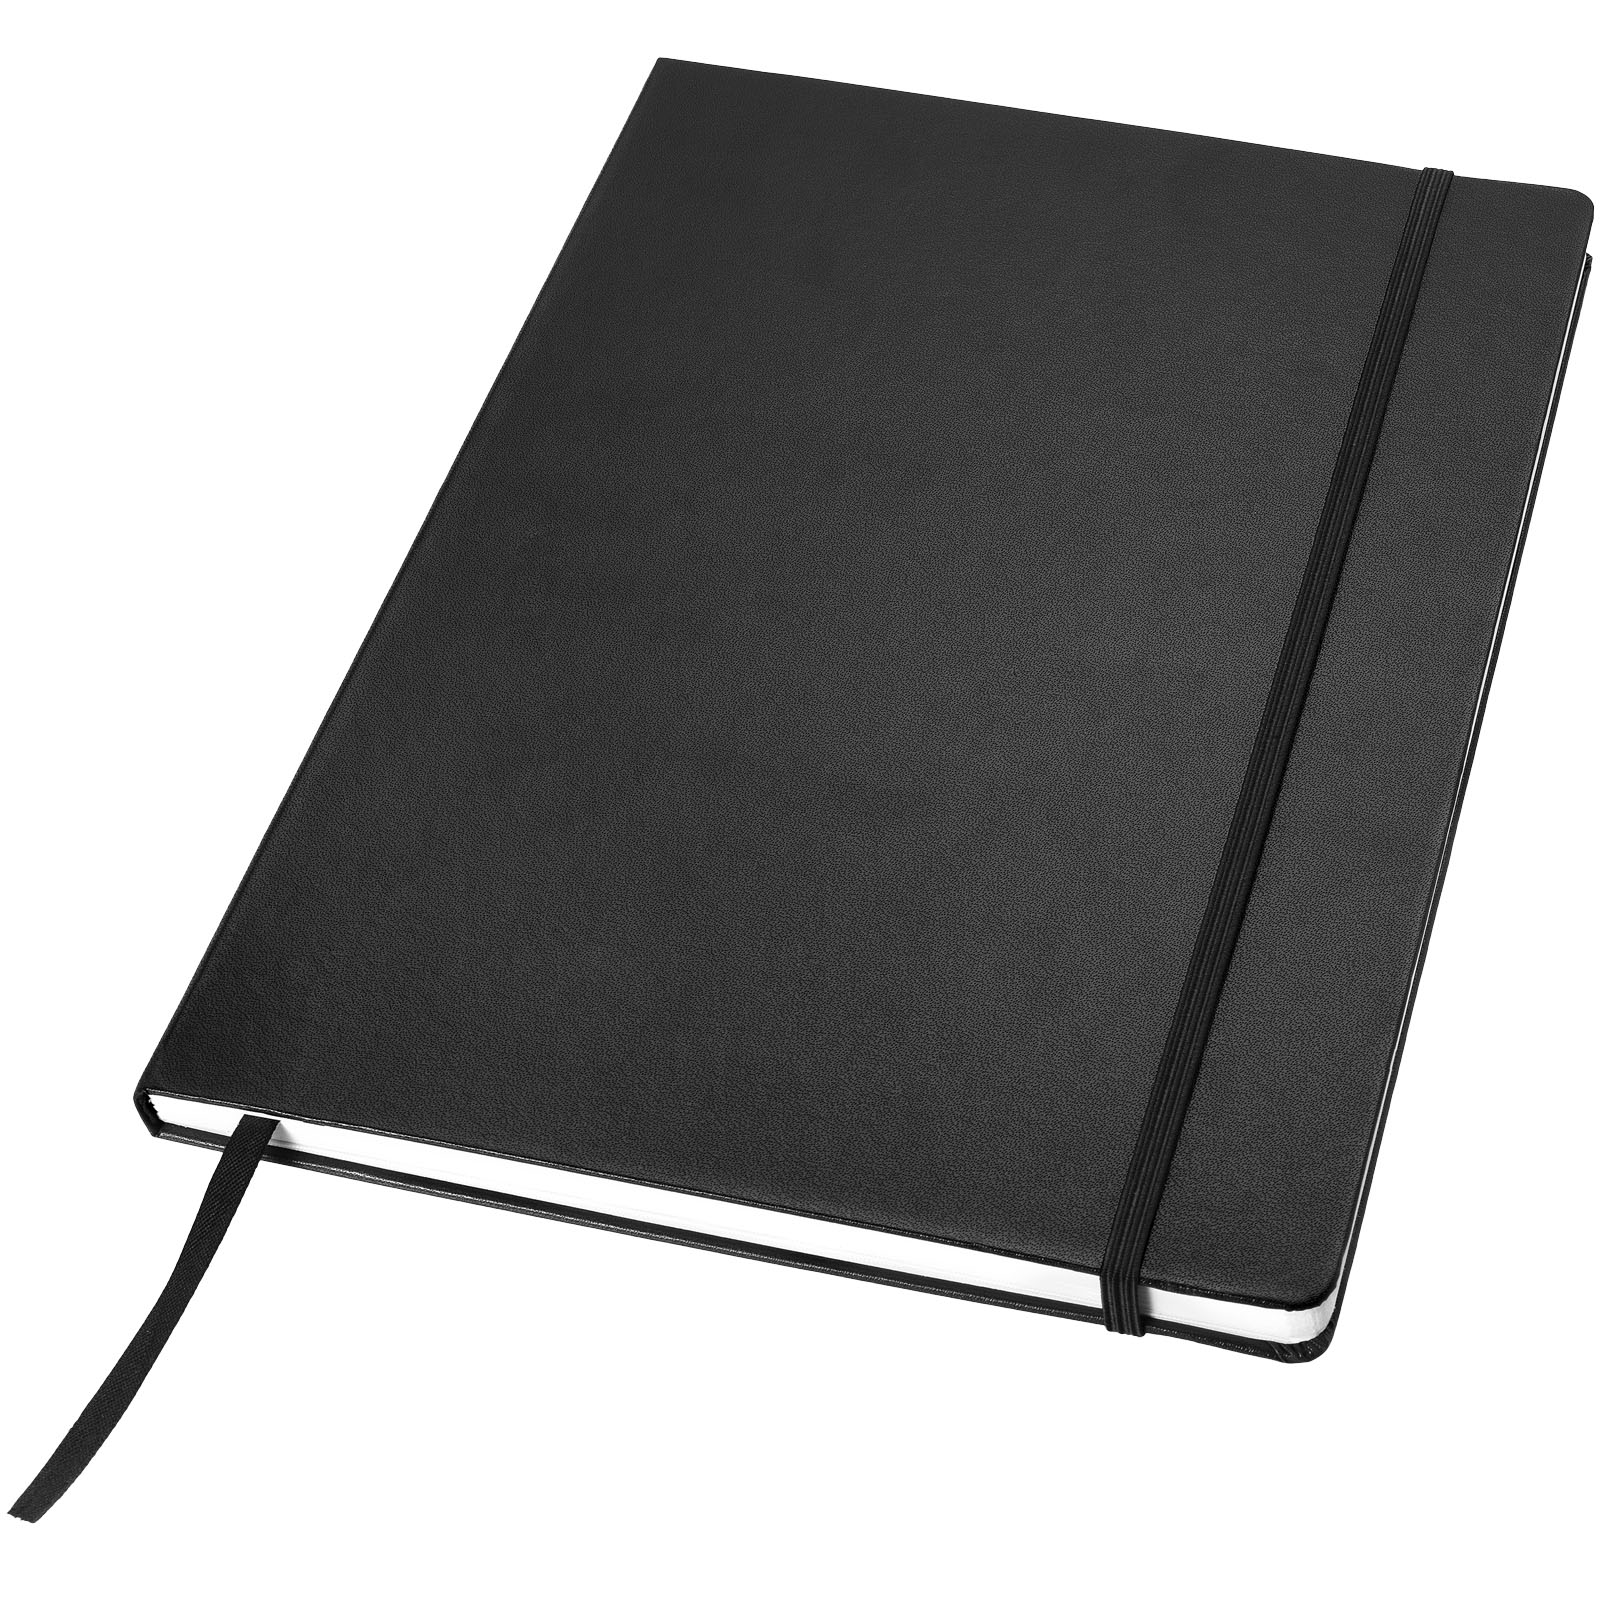 Hard cover notebooks - Executive A4 hard cover notebook